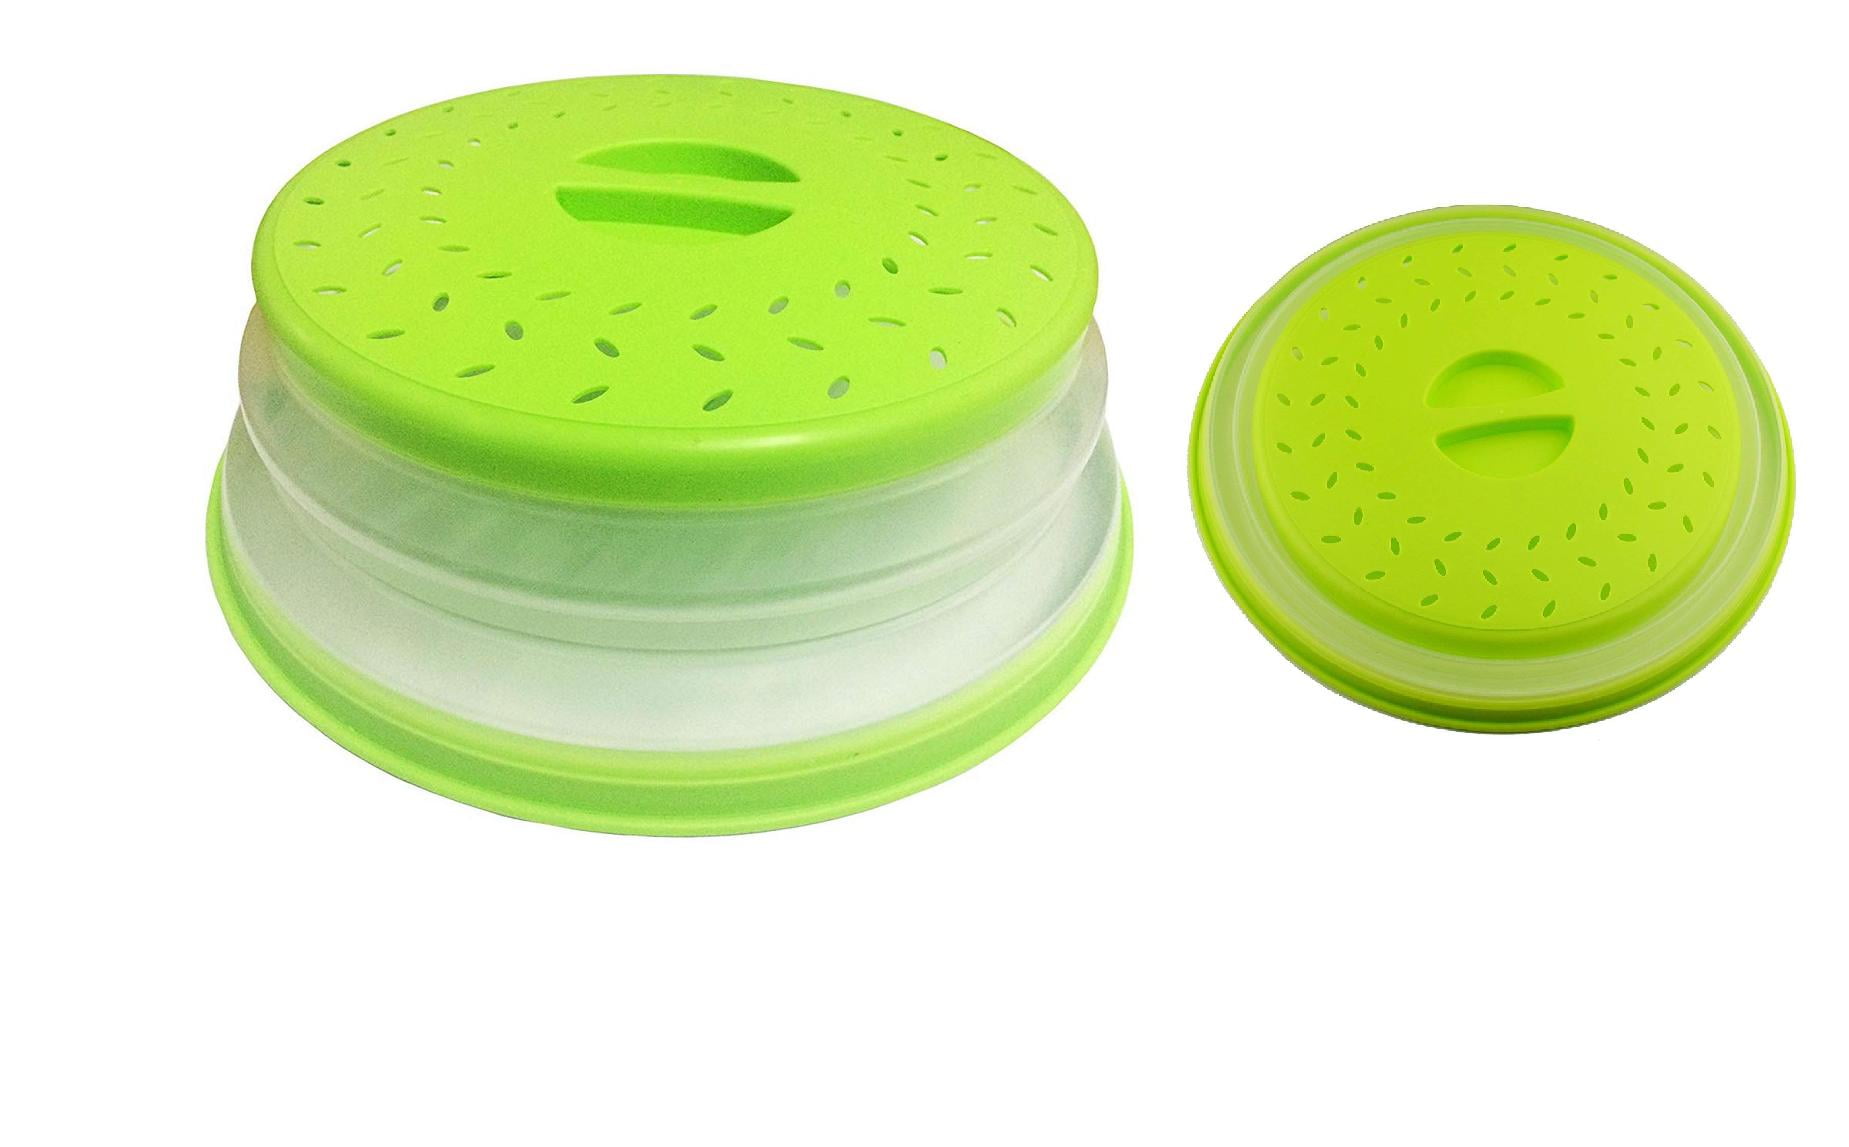 Microwave 11.02 Anti Splatter Cover Reusable Silicone Food Pot